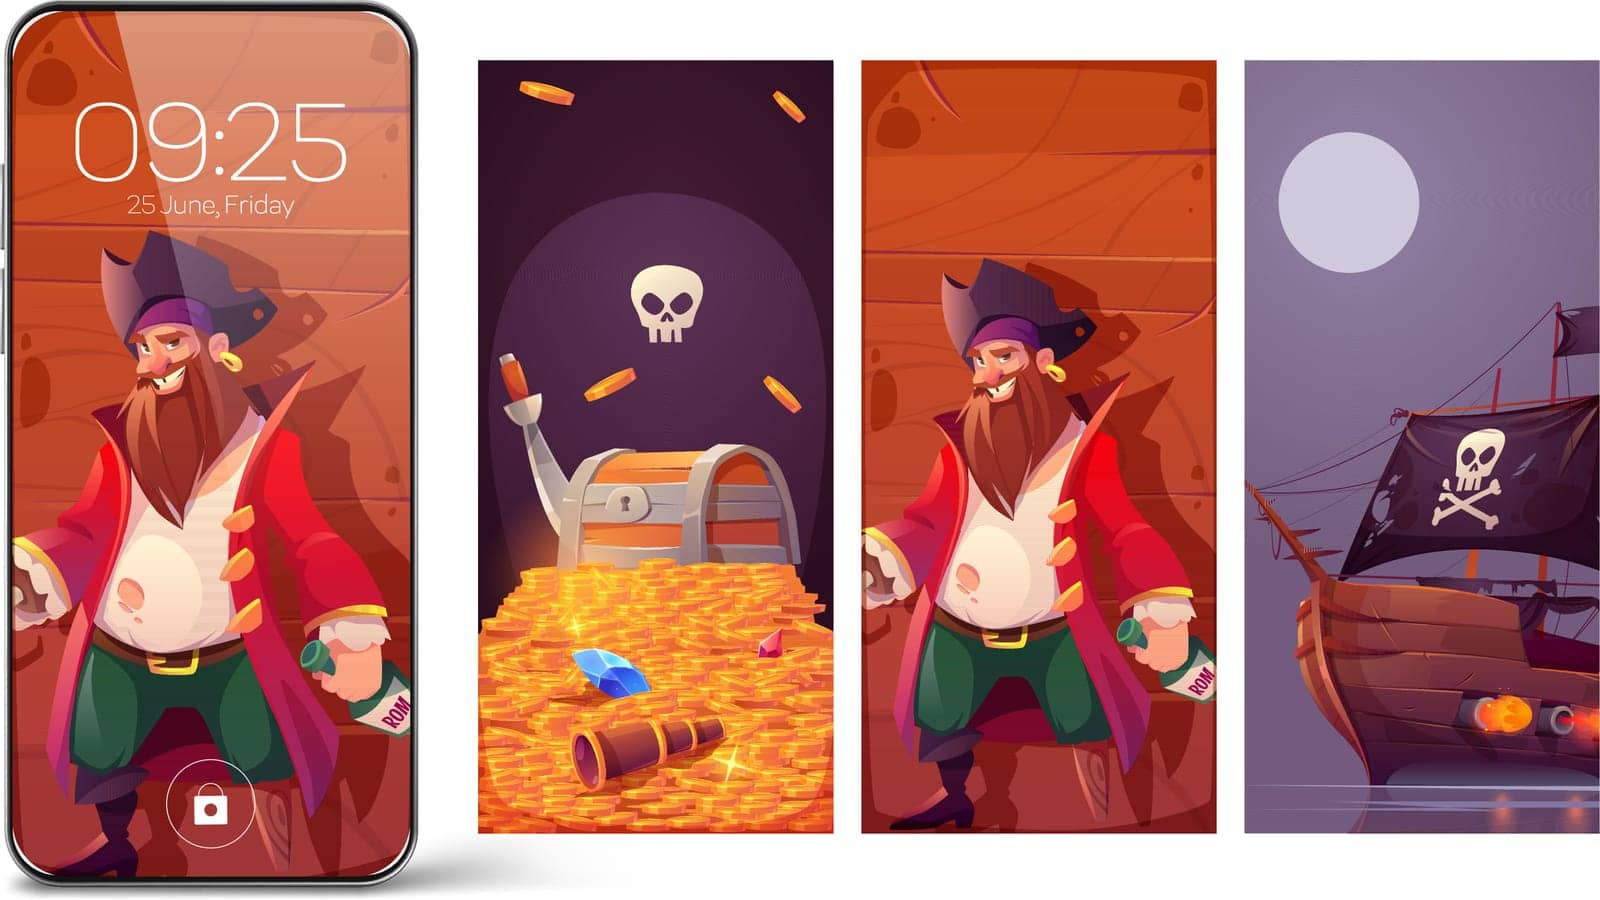 Pirate theme for smartphone screensaver with captain, treasure chest on pile of gold coins and wooden ship with black sails and flag. Vector cartoon illustrations for mobile phone screen